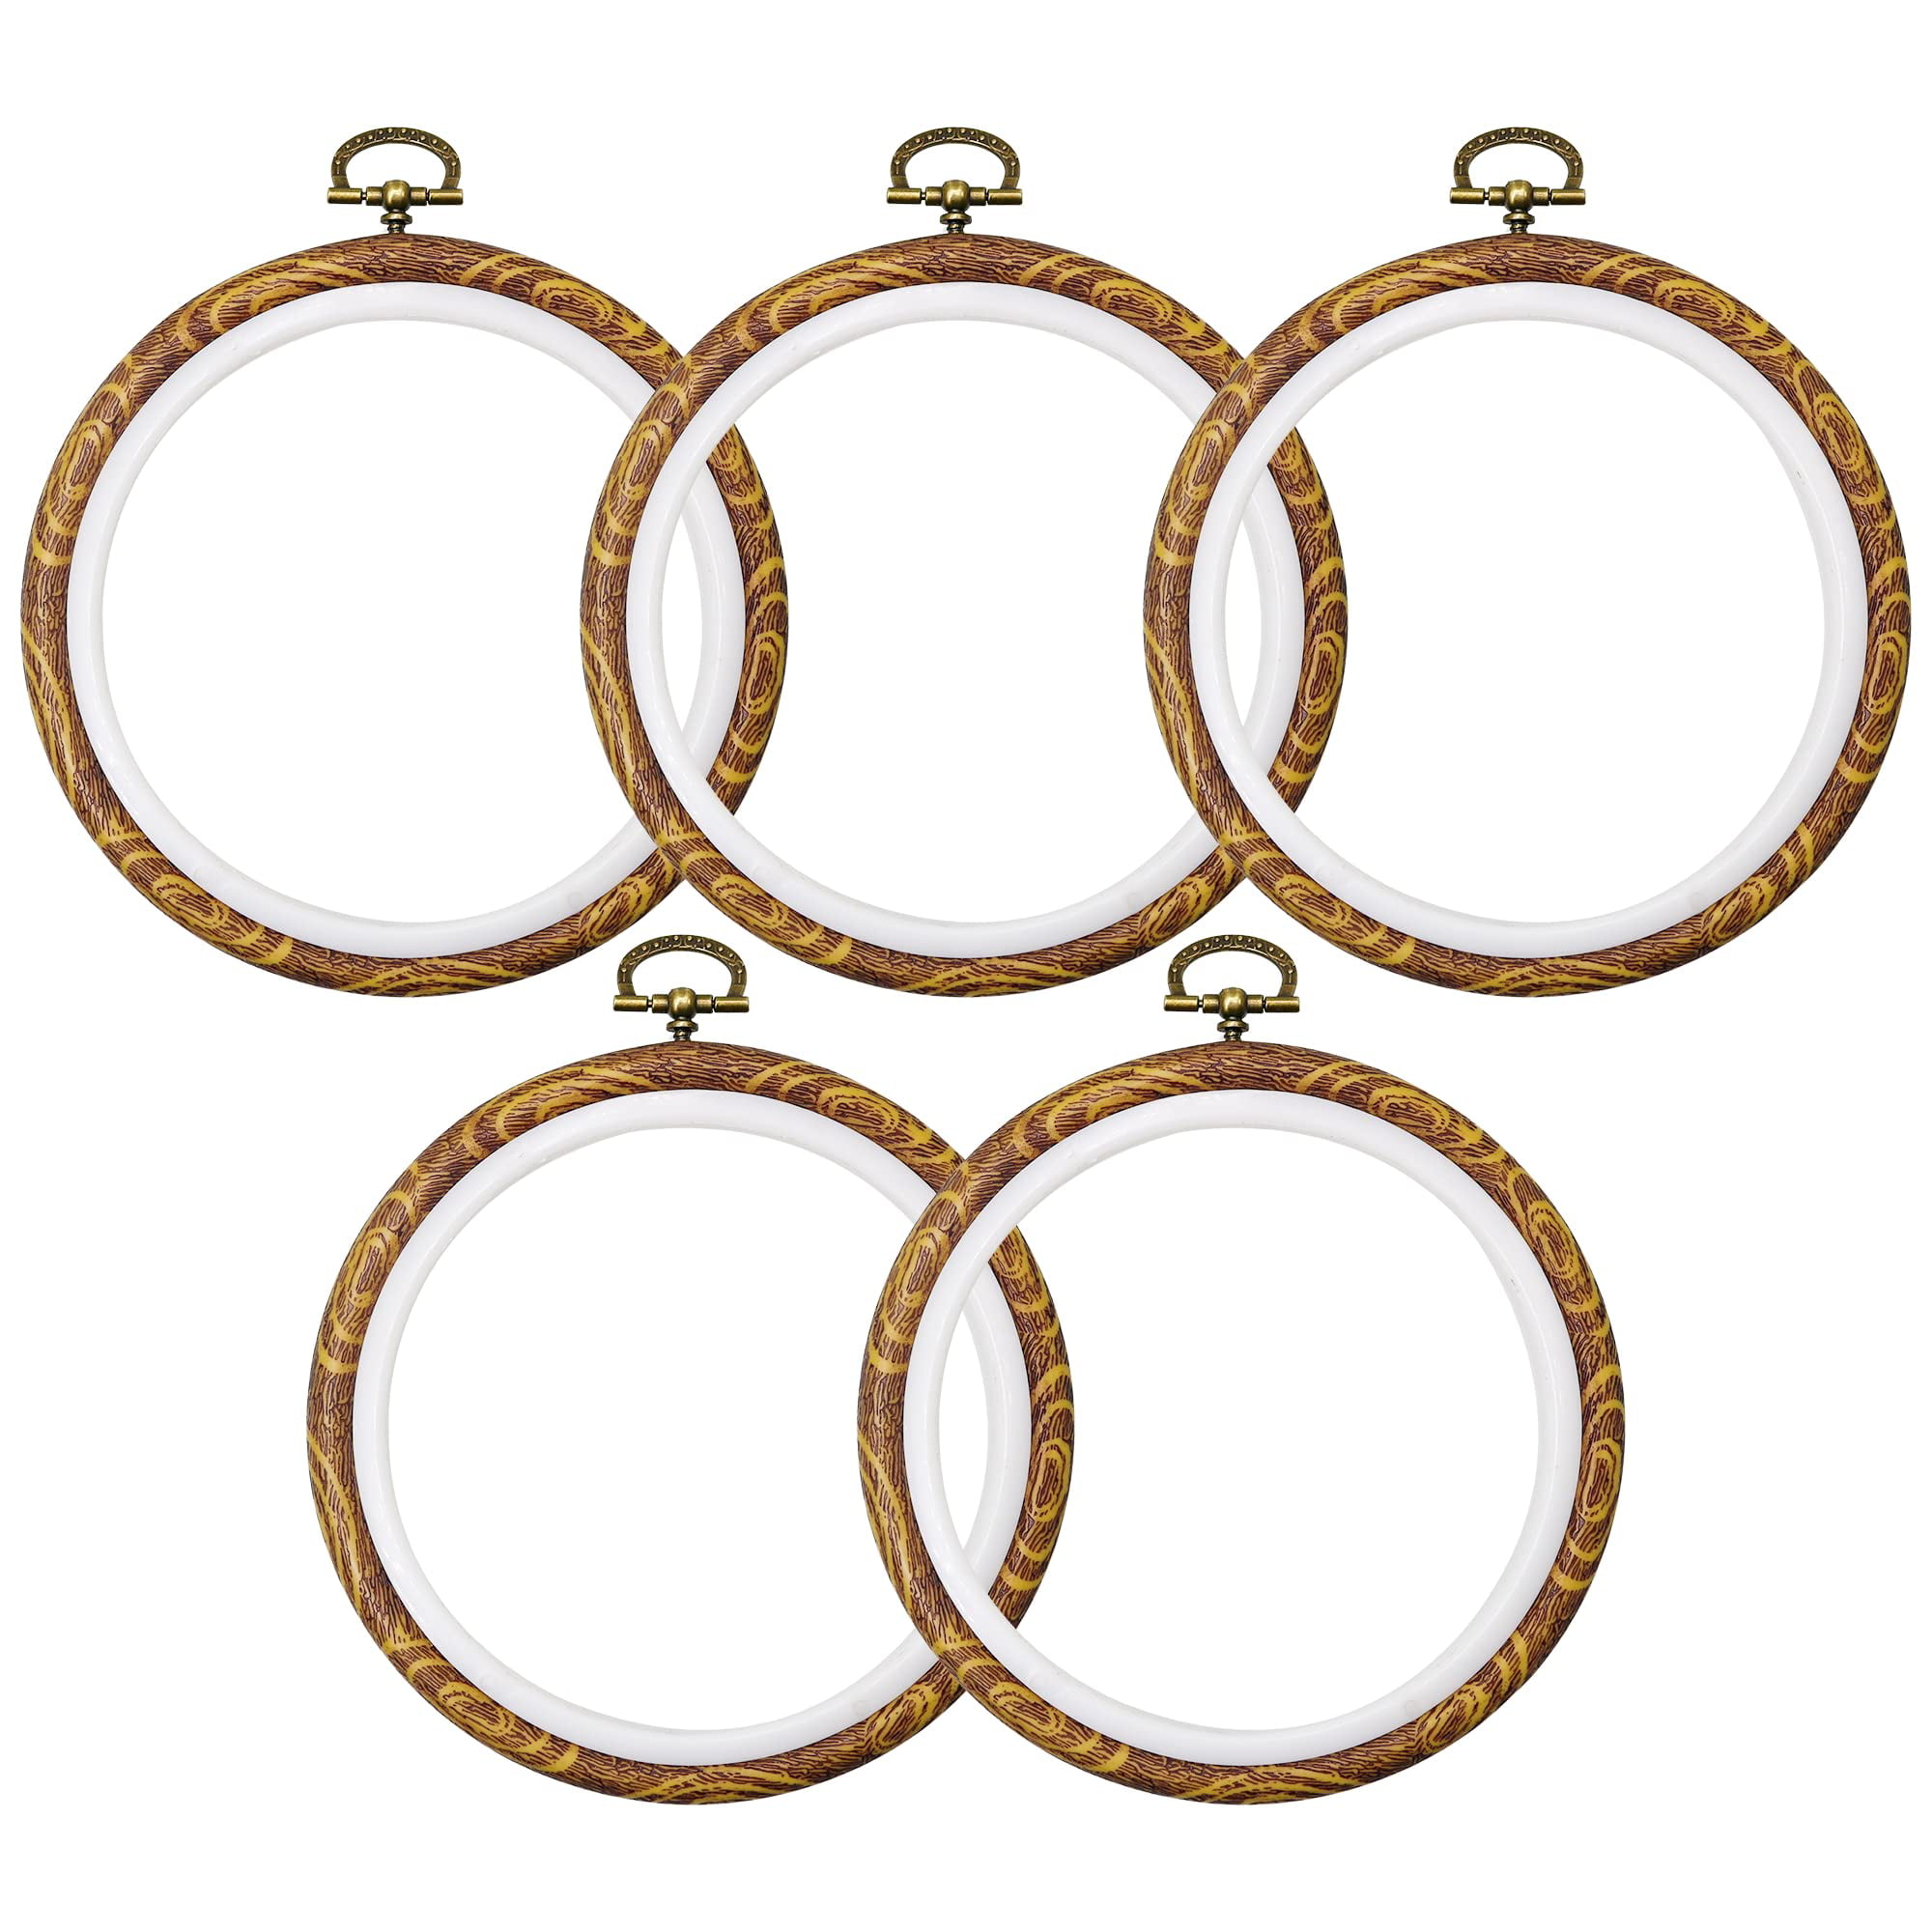 Caydo 4 Set Embroidery Hoops Imitated Wood Display Frame Circle Oval  Rectangular Octagonal Cross Stitch Hoop for Craft Sewing Hanging Ornaments  Craft Decoration Circle Oval Rectangular Octagonal